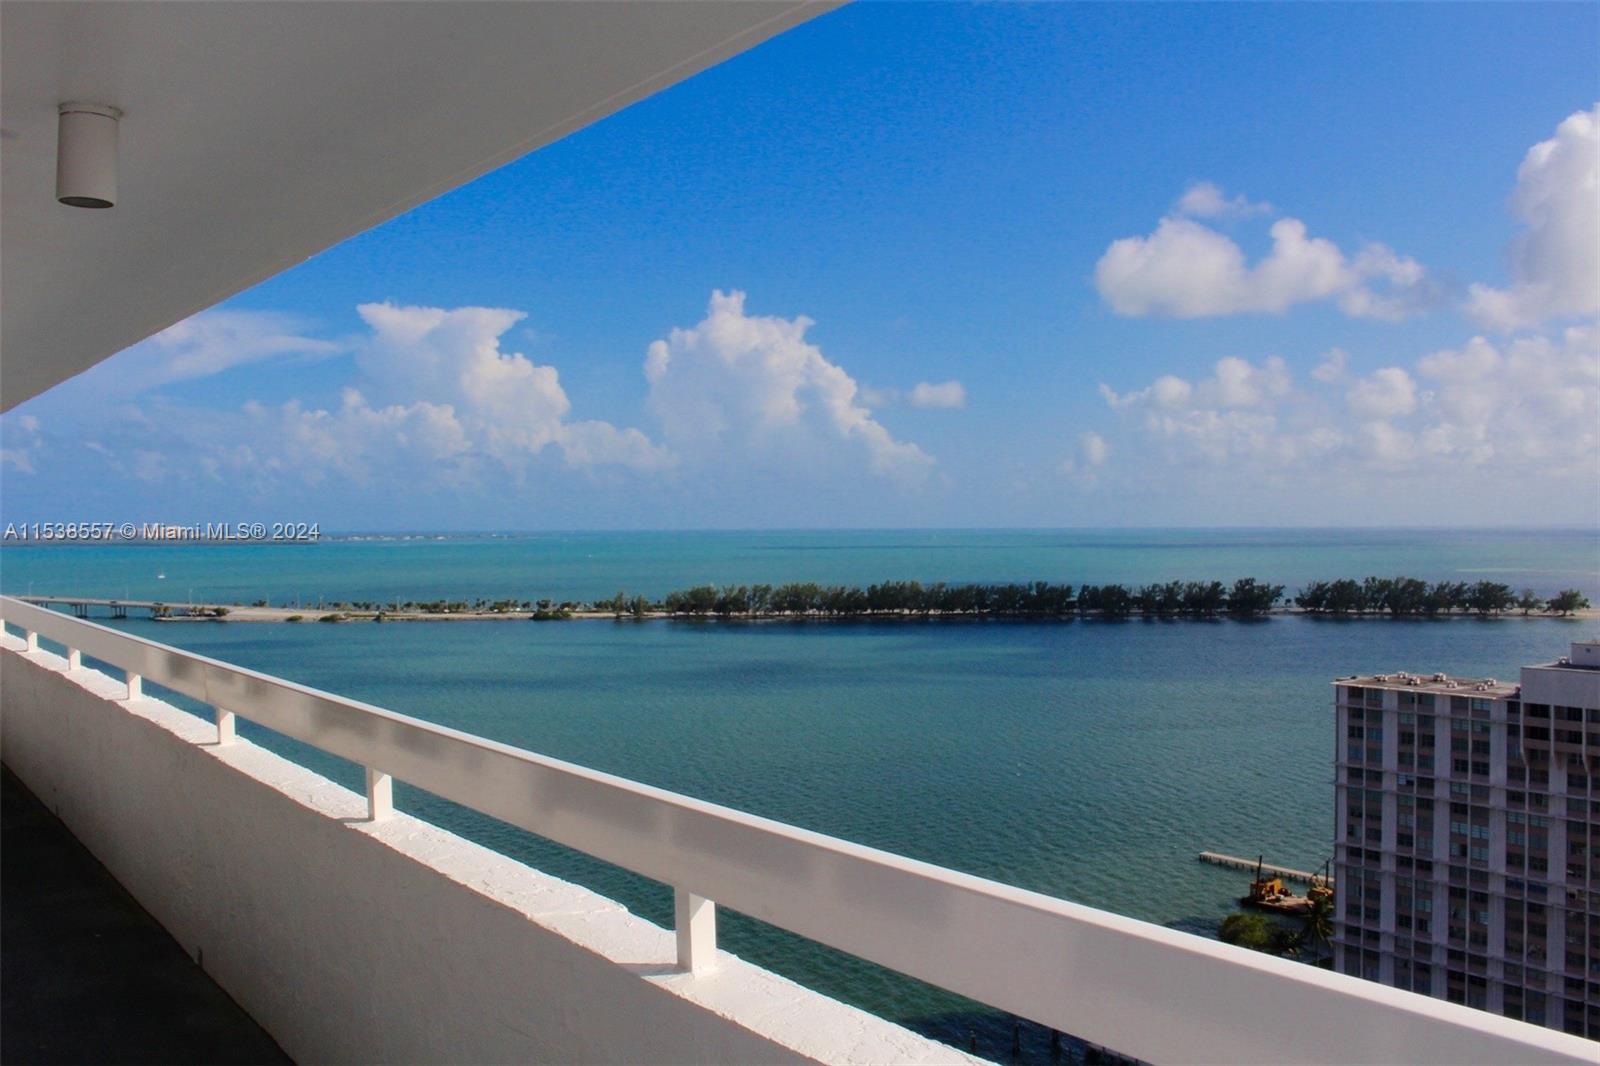 Luxury Waterfront Building, floor-to-ceiling glass provides a beautiful wide open view of Key Biscayne, Coconut Grove and the Gables to the South. Endless Balcony is accessible from every room with magical views to Brickell's skyline. Full Service building which offers: tennis, bay-front pool, Jacuzzi, sauna, gym, BBQ area, party room, door man, valet and more. Walking distance to Mary Brickell Village, Publix, Bayside and Metro Mover. Unit features 2 parking spaces: P3-265 and P3-333.